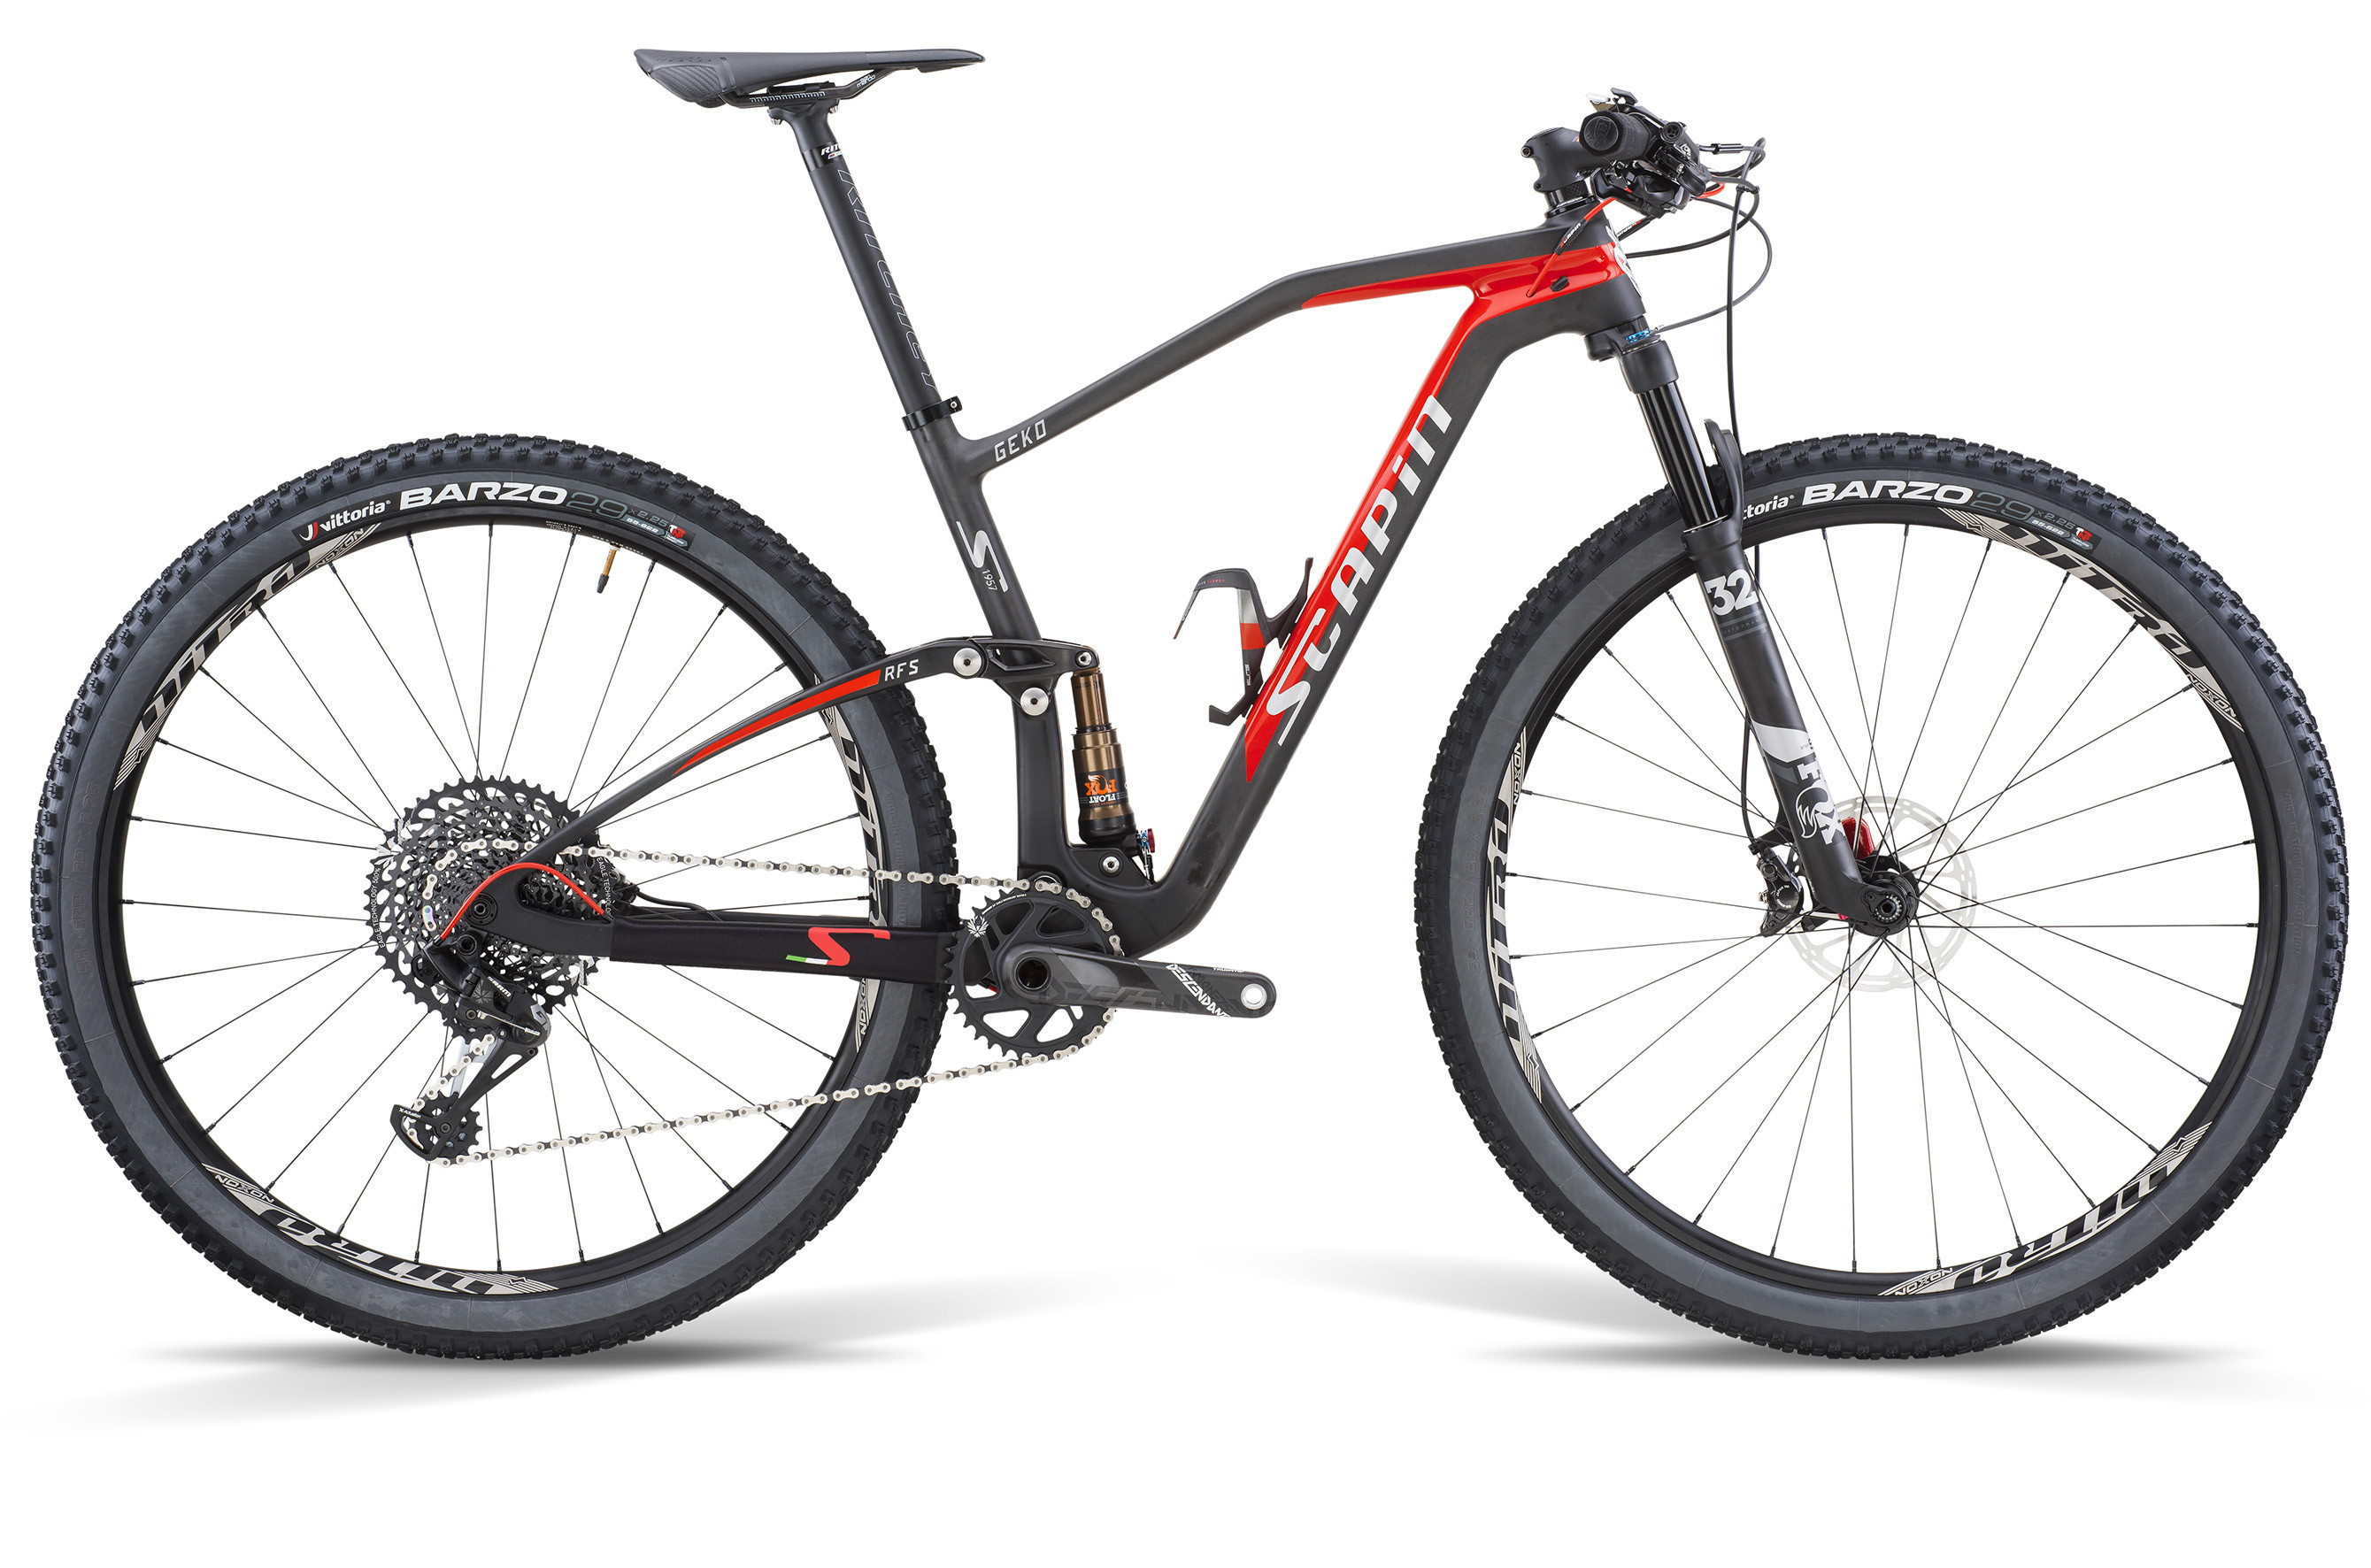 SCAPIN VTT COMPLET GEKO 29" CARBON - SRAM X01 12sp - SID - Taille S Black/Red